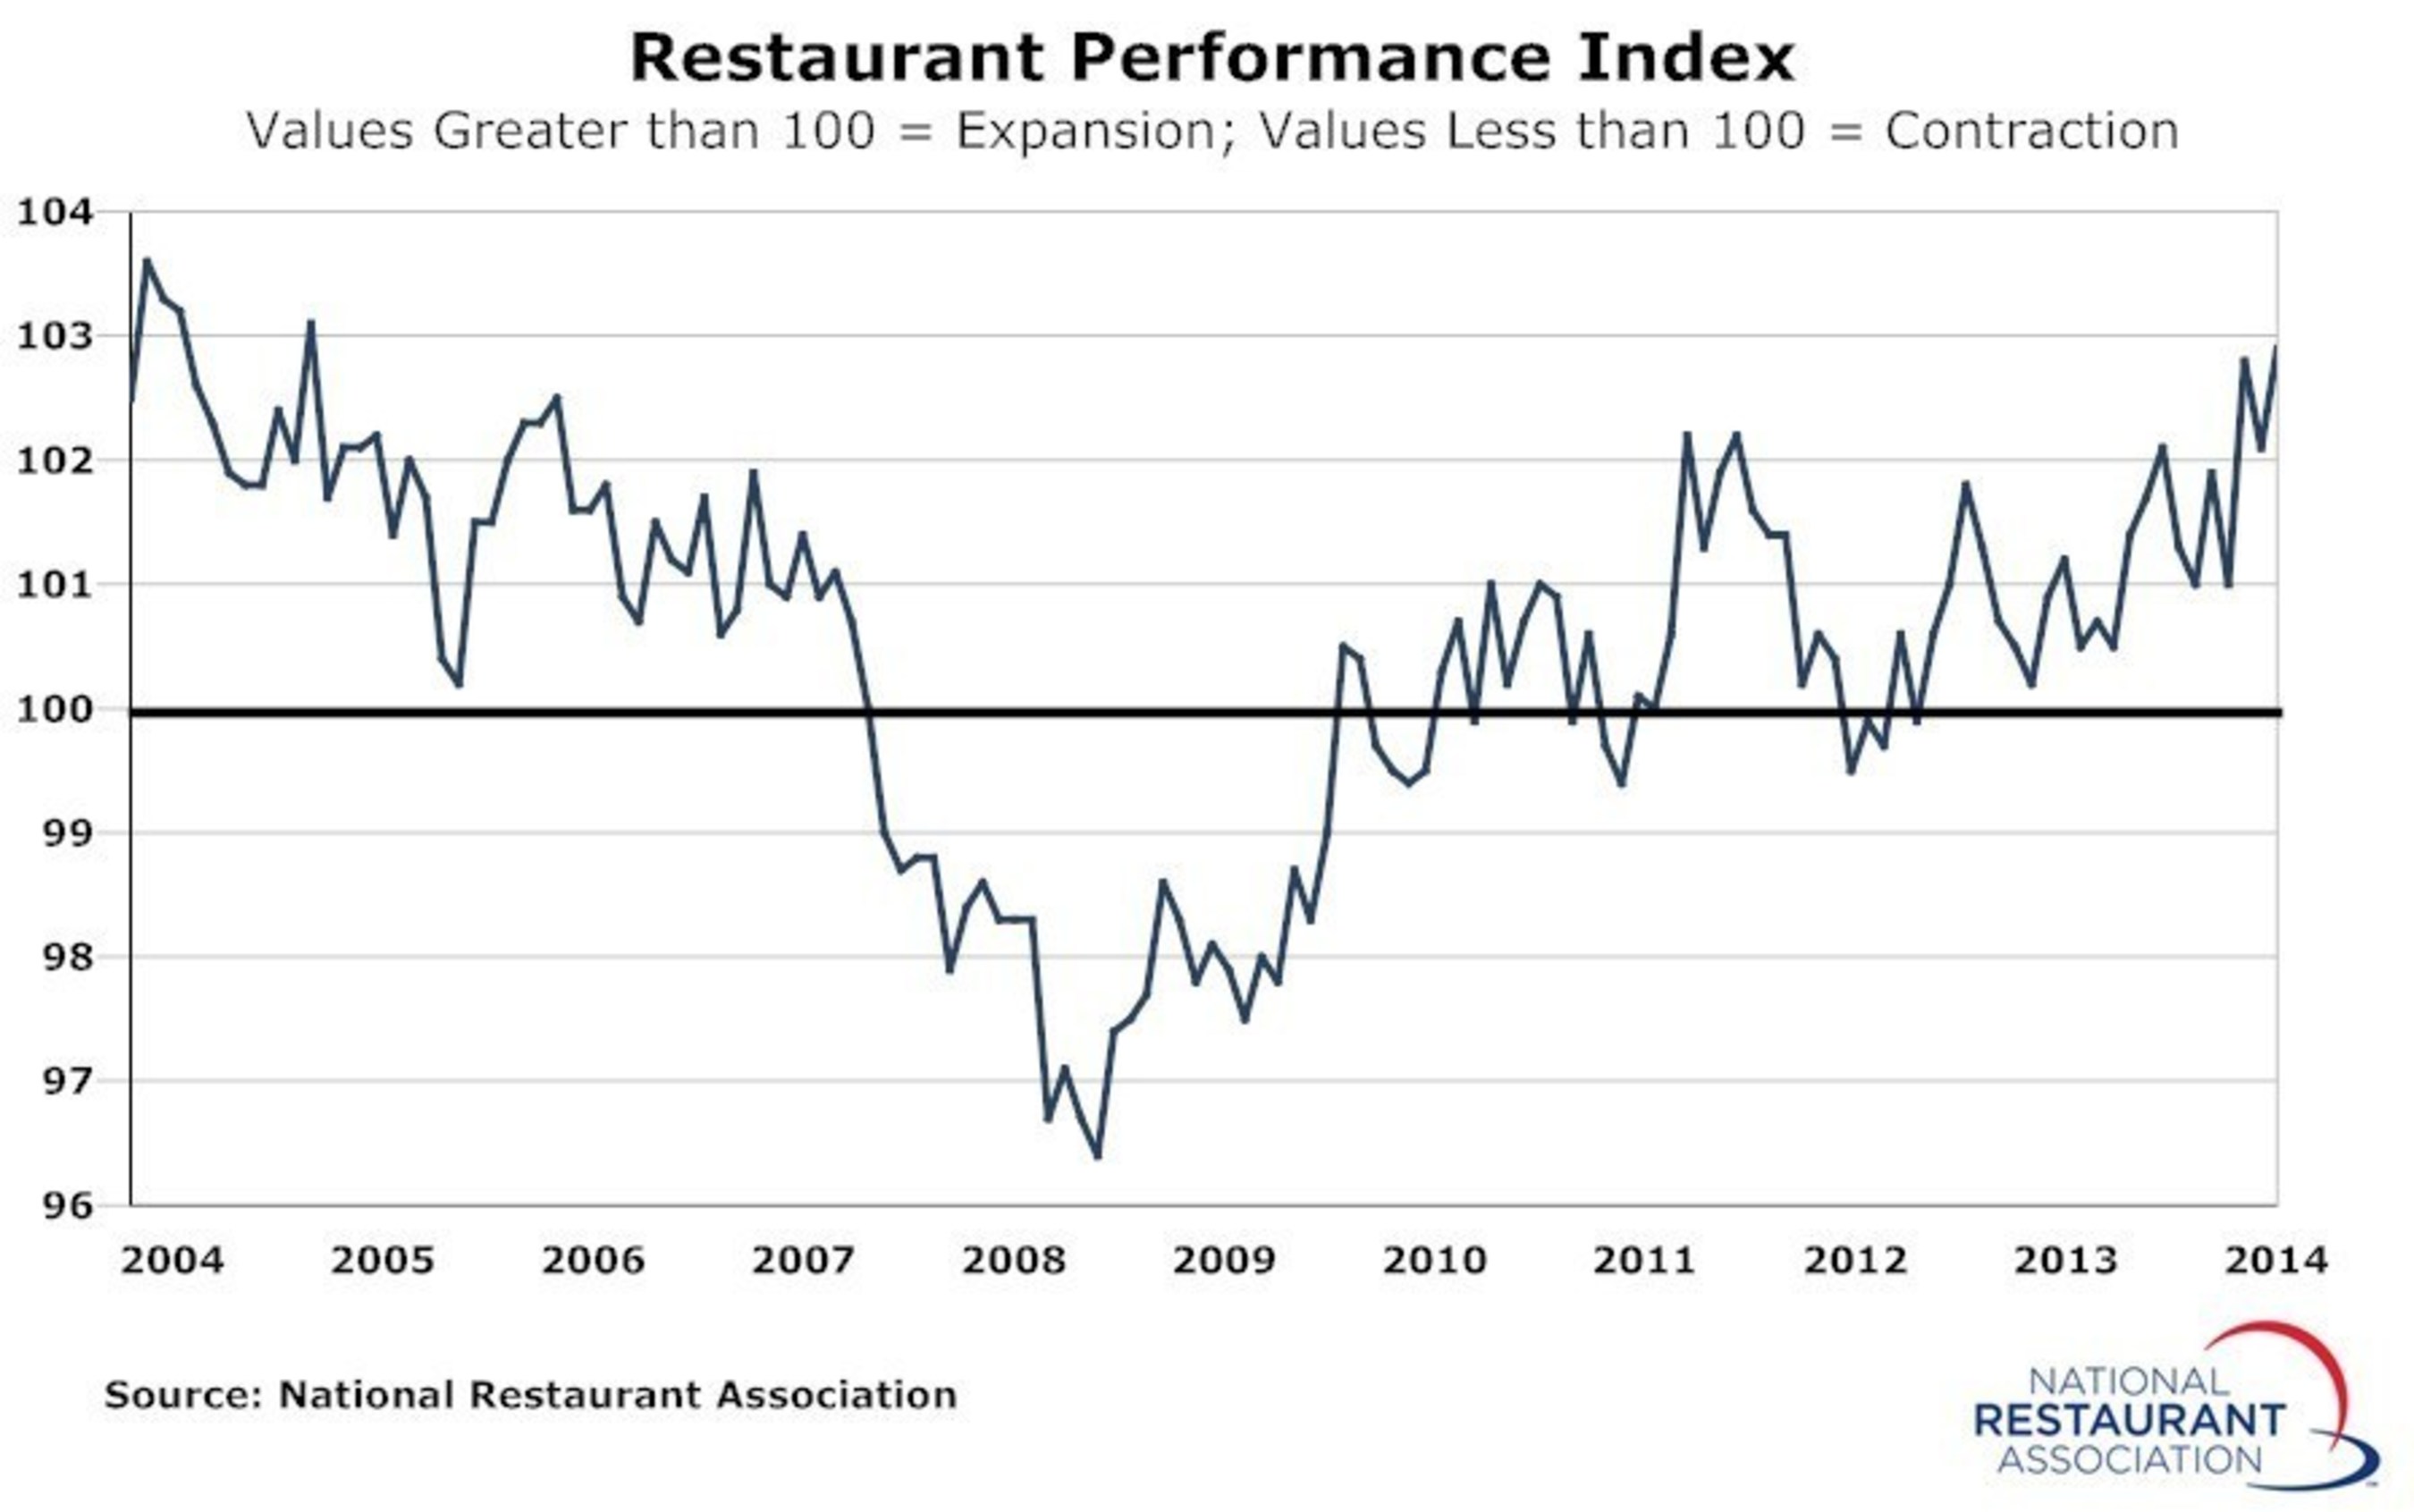 Driven by positive sales and traffic and an uptick in capital expenditures, the National Restaurant Association's Restaurant Performance Index (RPI) finished 2014 with a solid gain. The RPI stood at 102.9 in December, up 0.8 percent from its November level of 102.1.